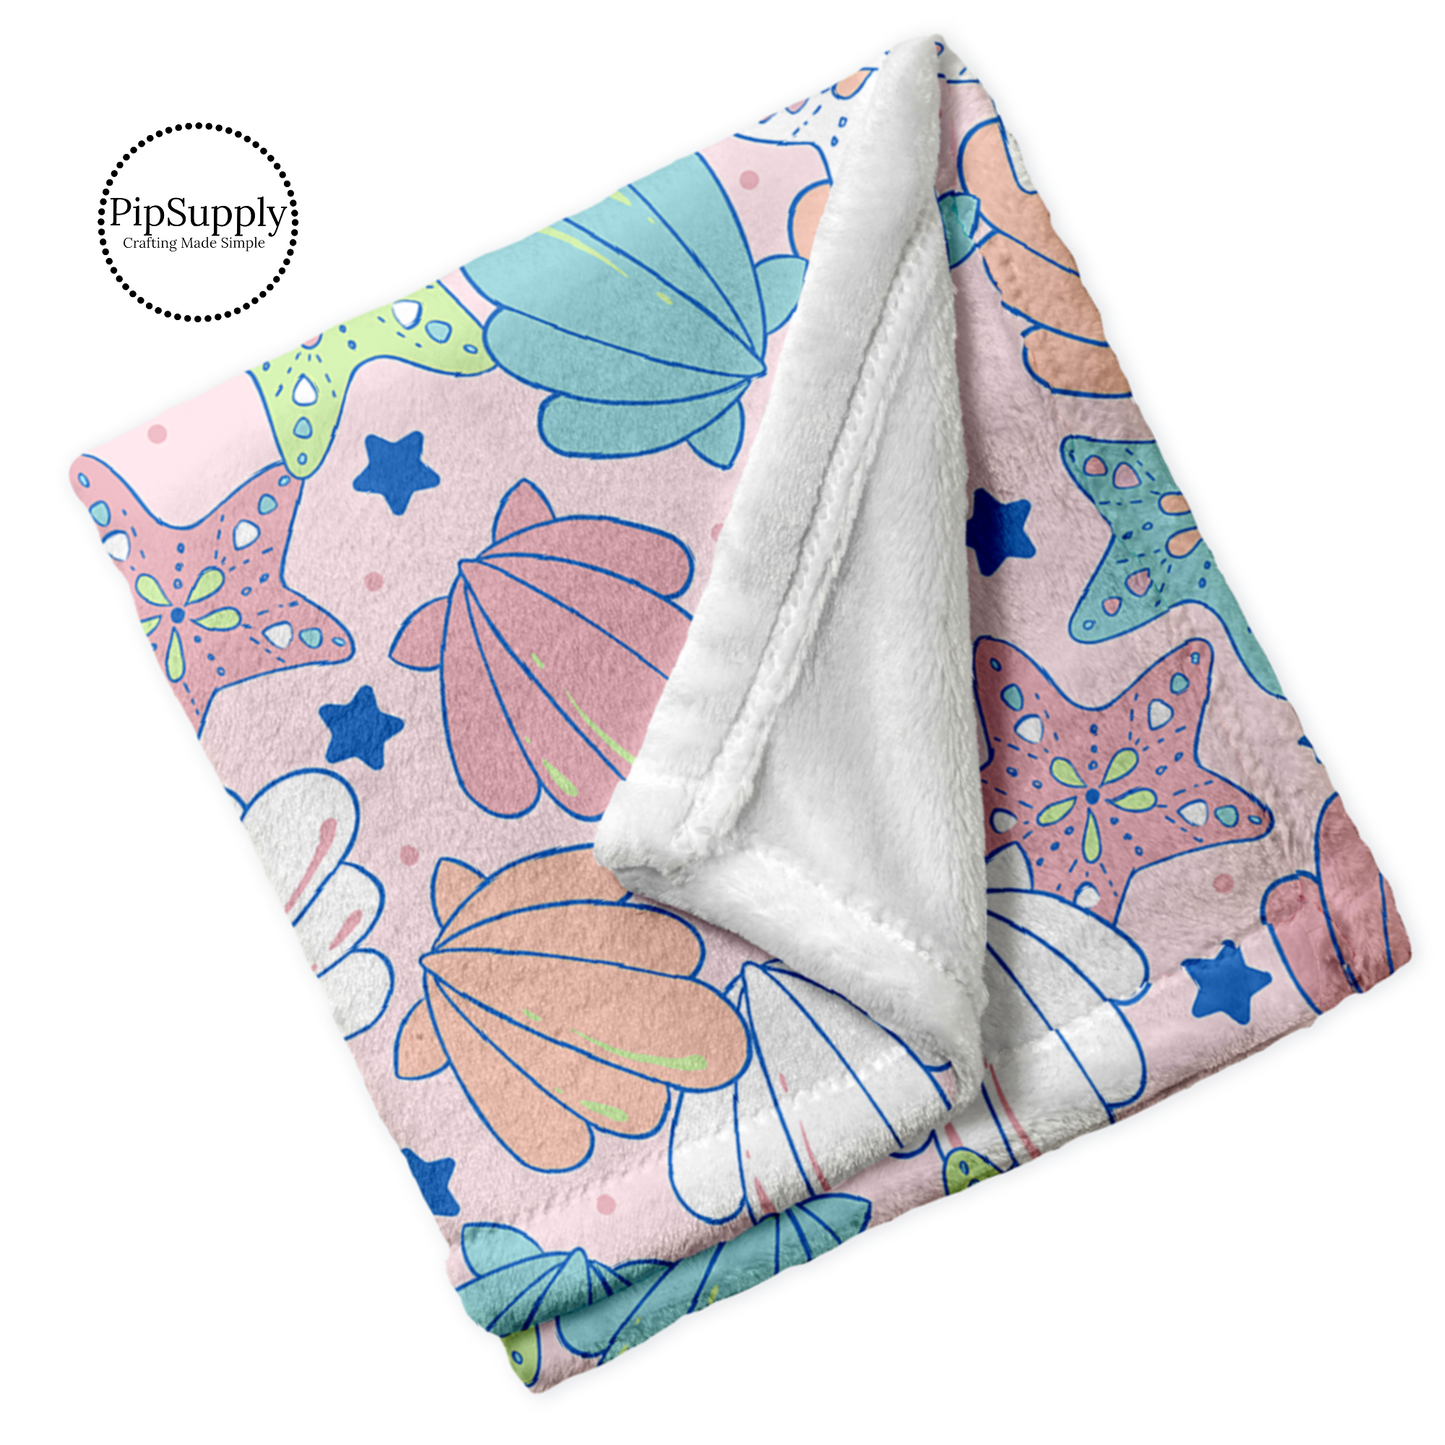 Soft folded white blanket with top print of aqua, pink, tangerine, and green seashells and starfish on light pink.